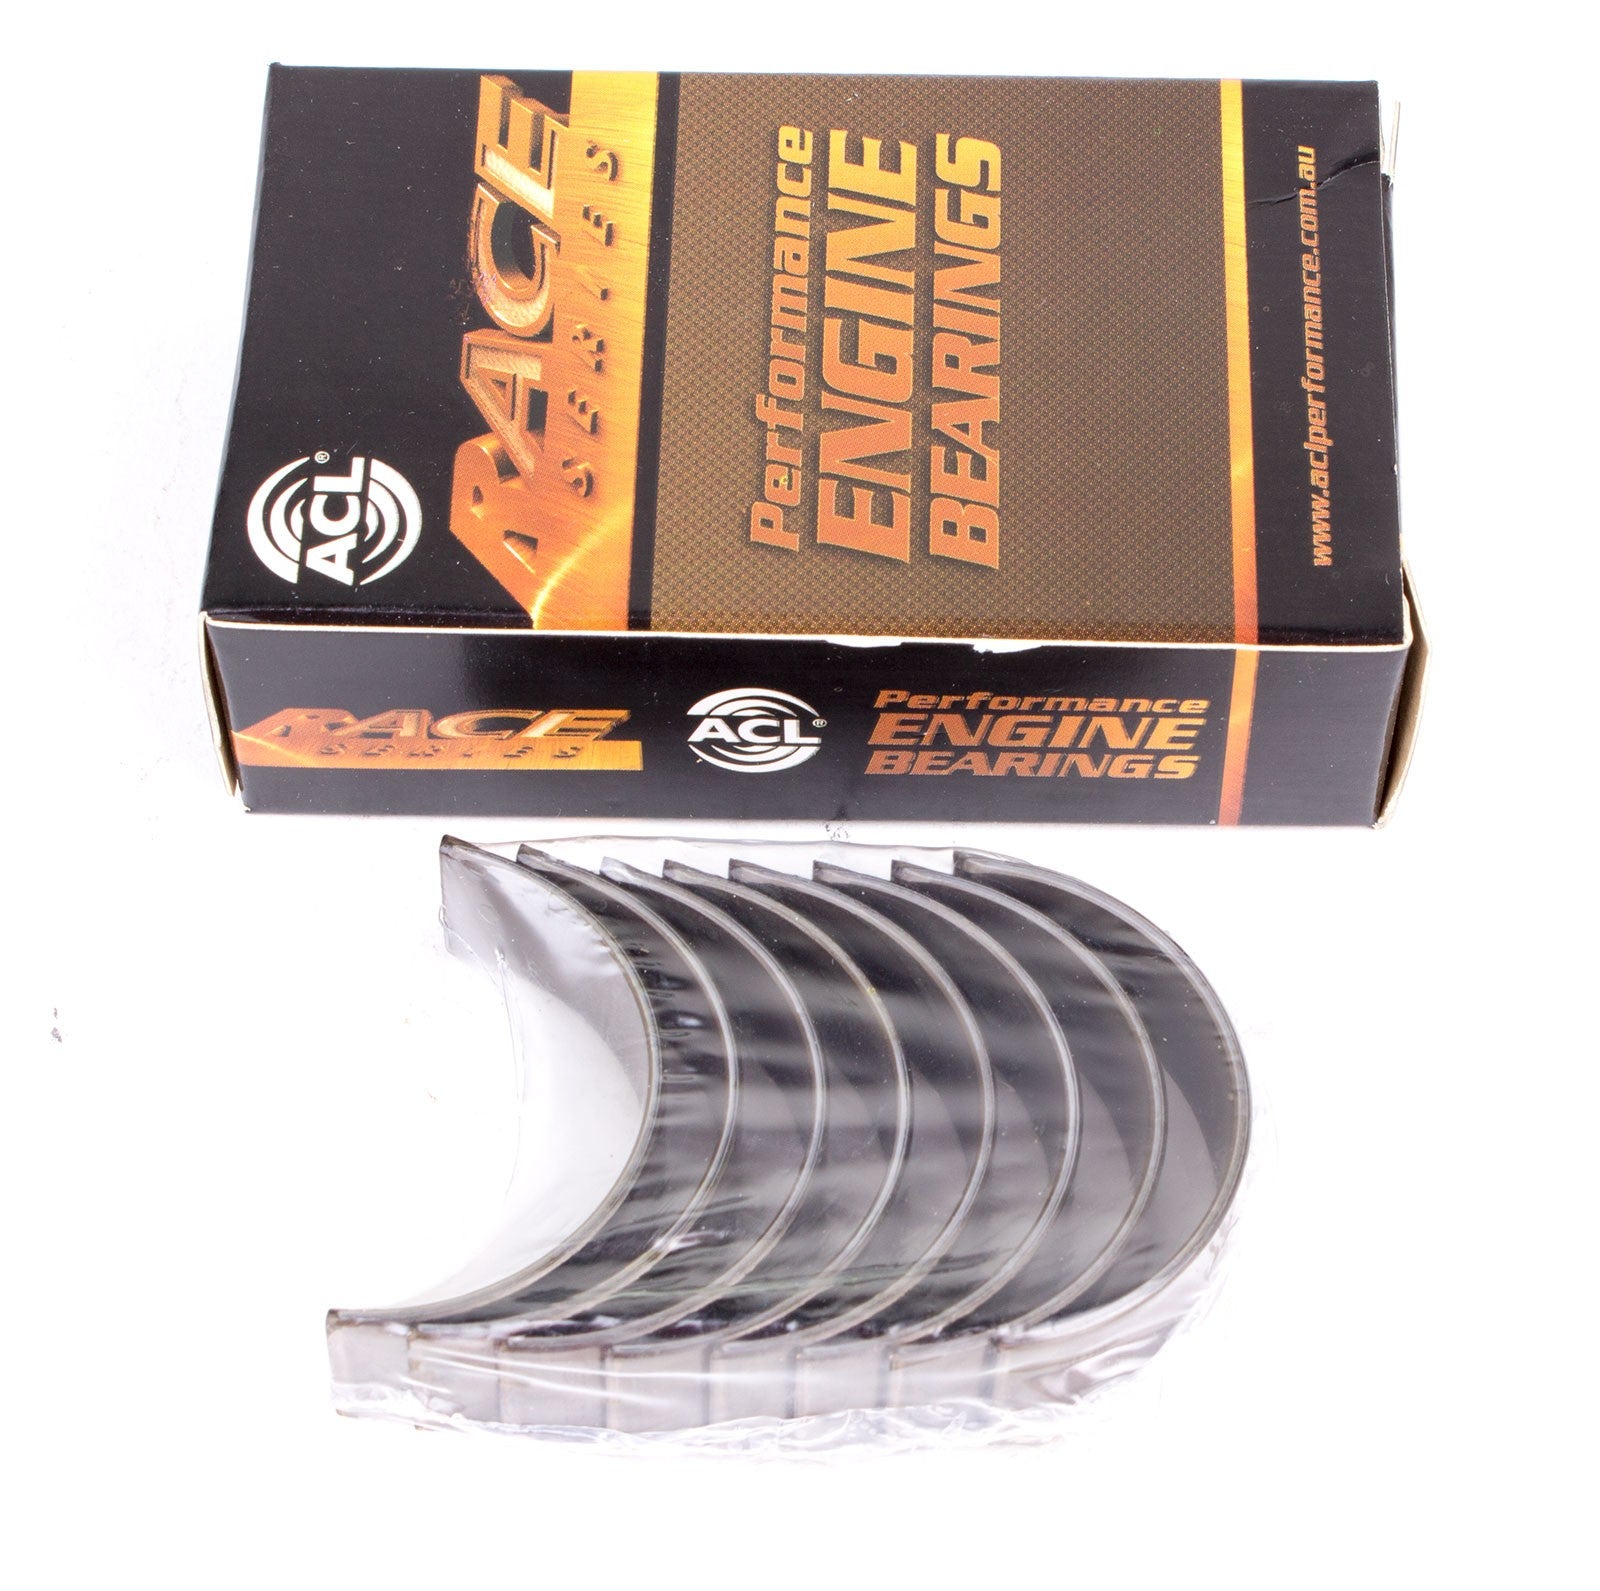 ACL 5M1010H-01 Main bearing set (ACL Race Series) Photo-0 